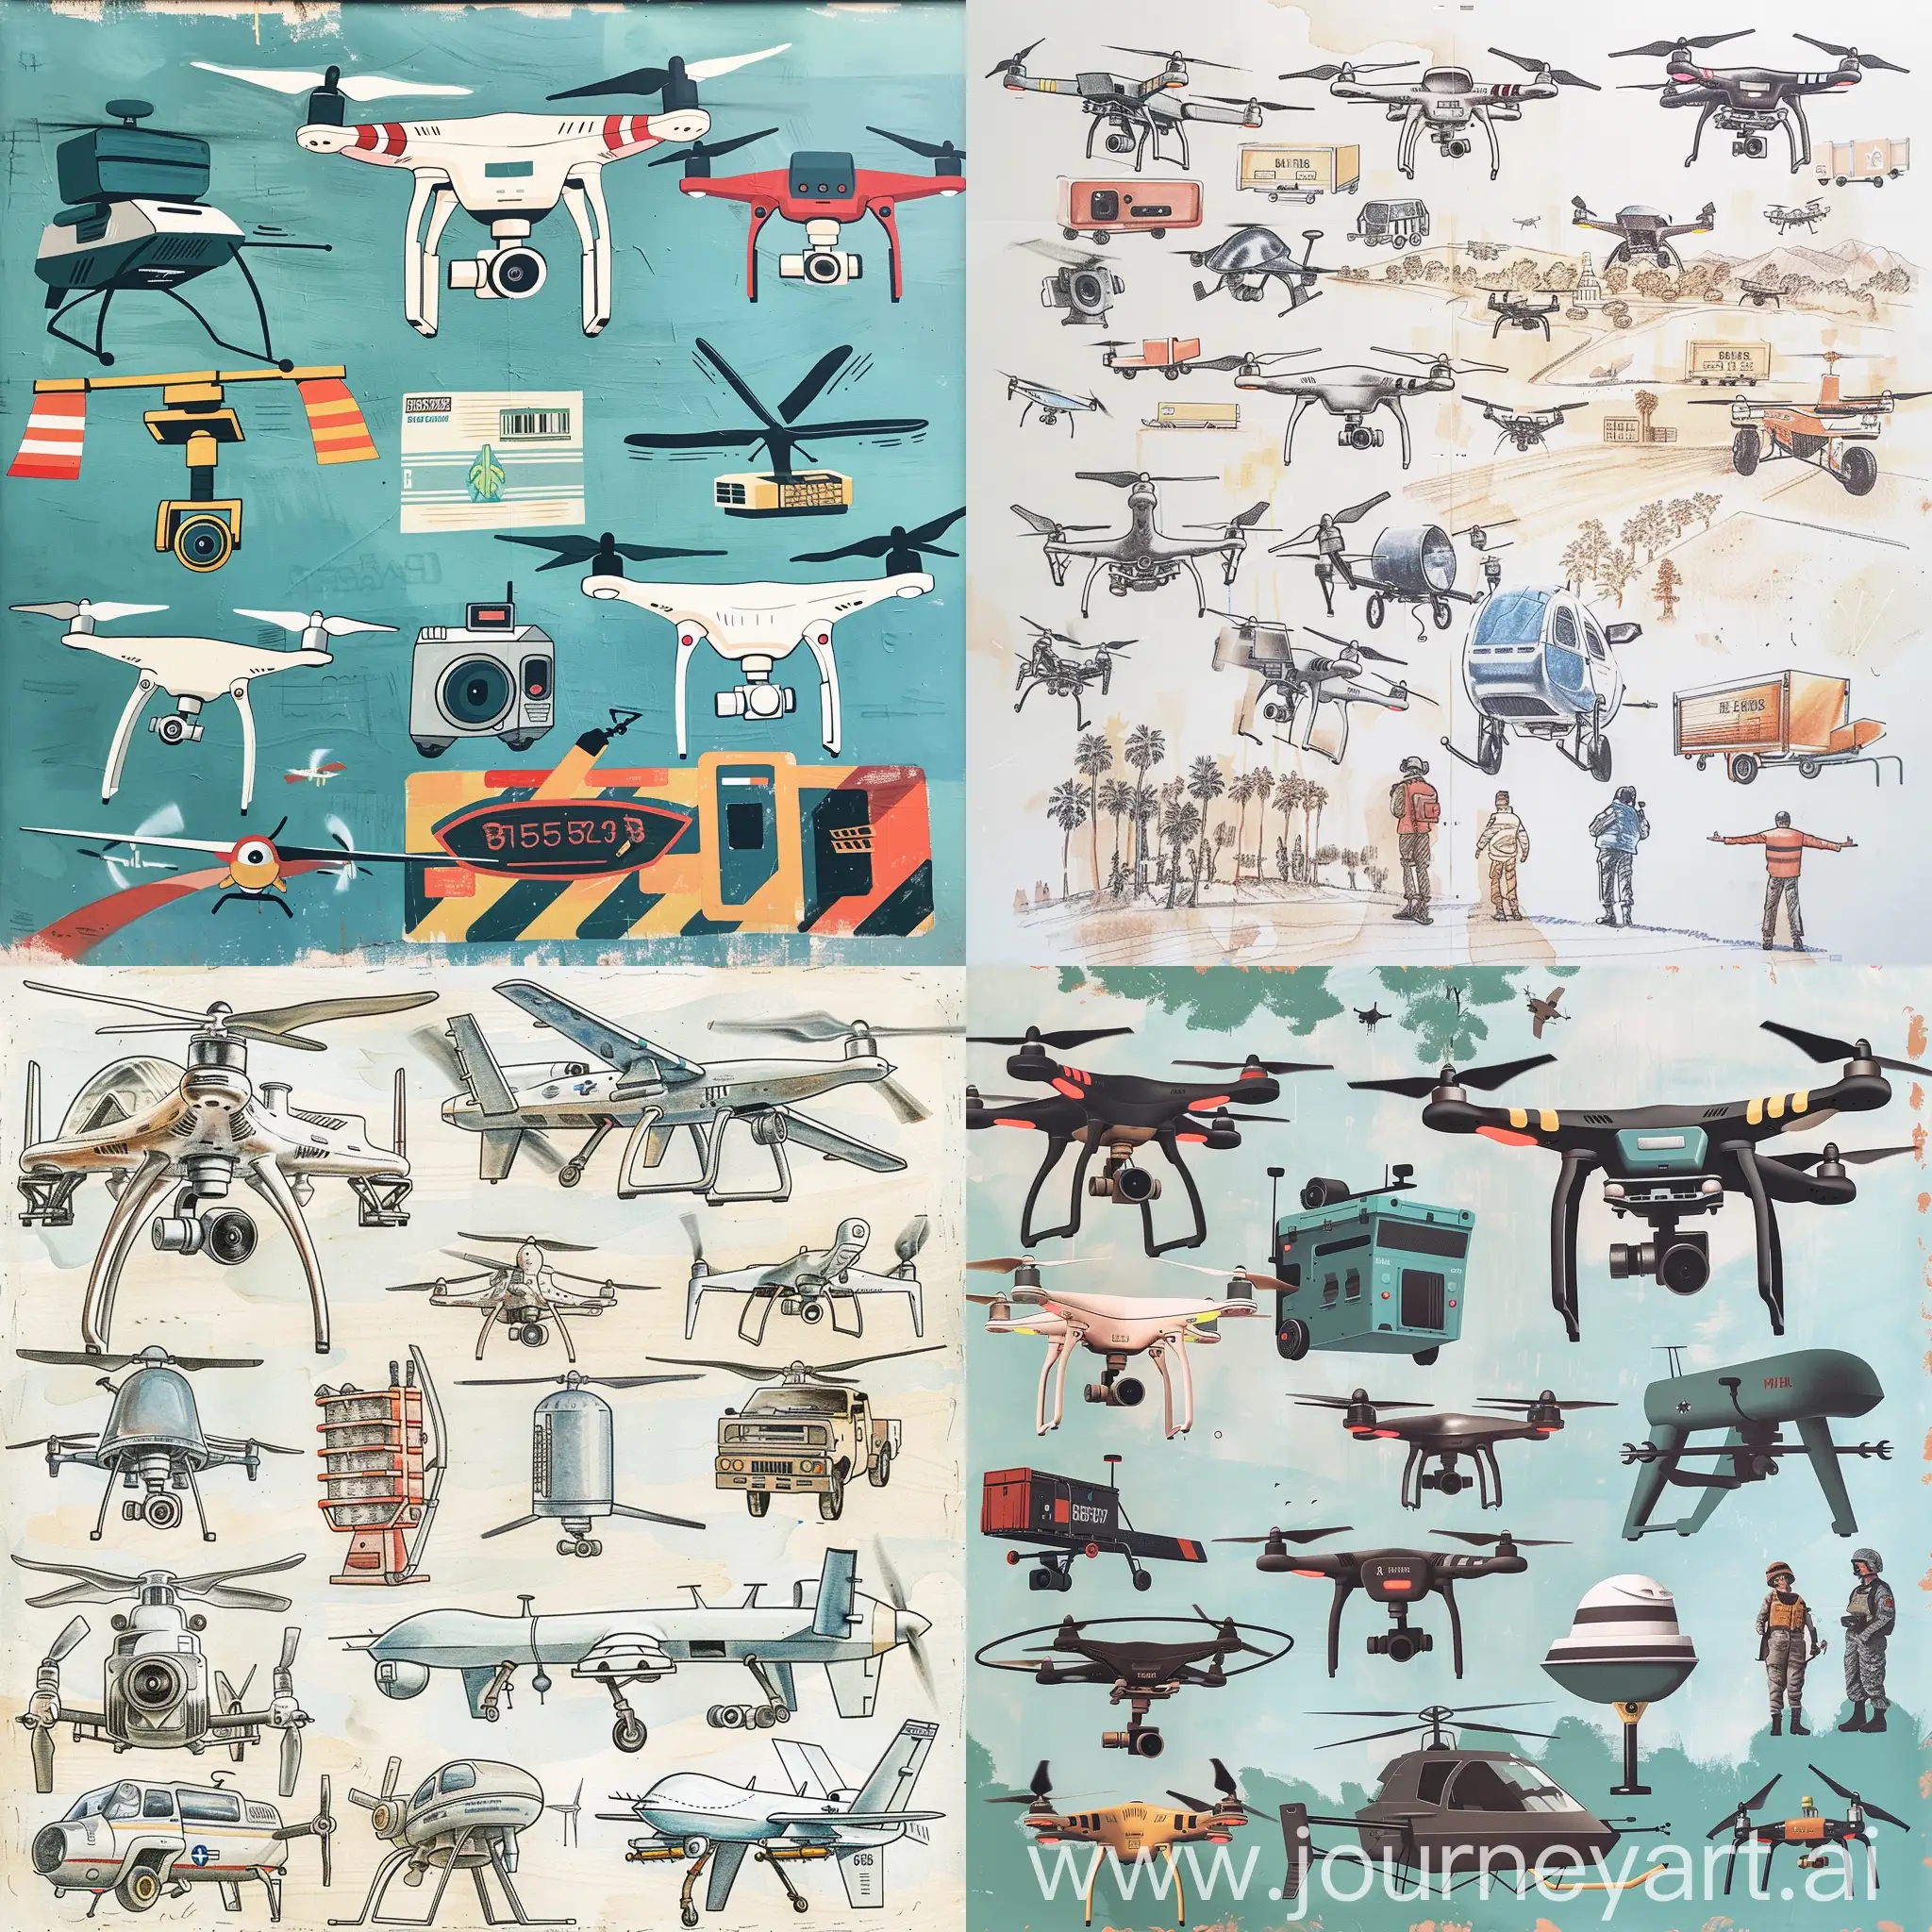 Create an illustrative sketch for a mural in a children's educational institution. The theme should focus on various types of drones used in movie filming, postal delivery, agriculture, military operations, reconnaissance, and more. Use only the following colors: #b68cd6, #d06caf, #7d1e8e, #f7f3f6, #b659a0, #af95bb, #87599f, #5b3e7d.